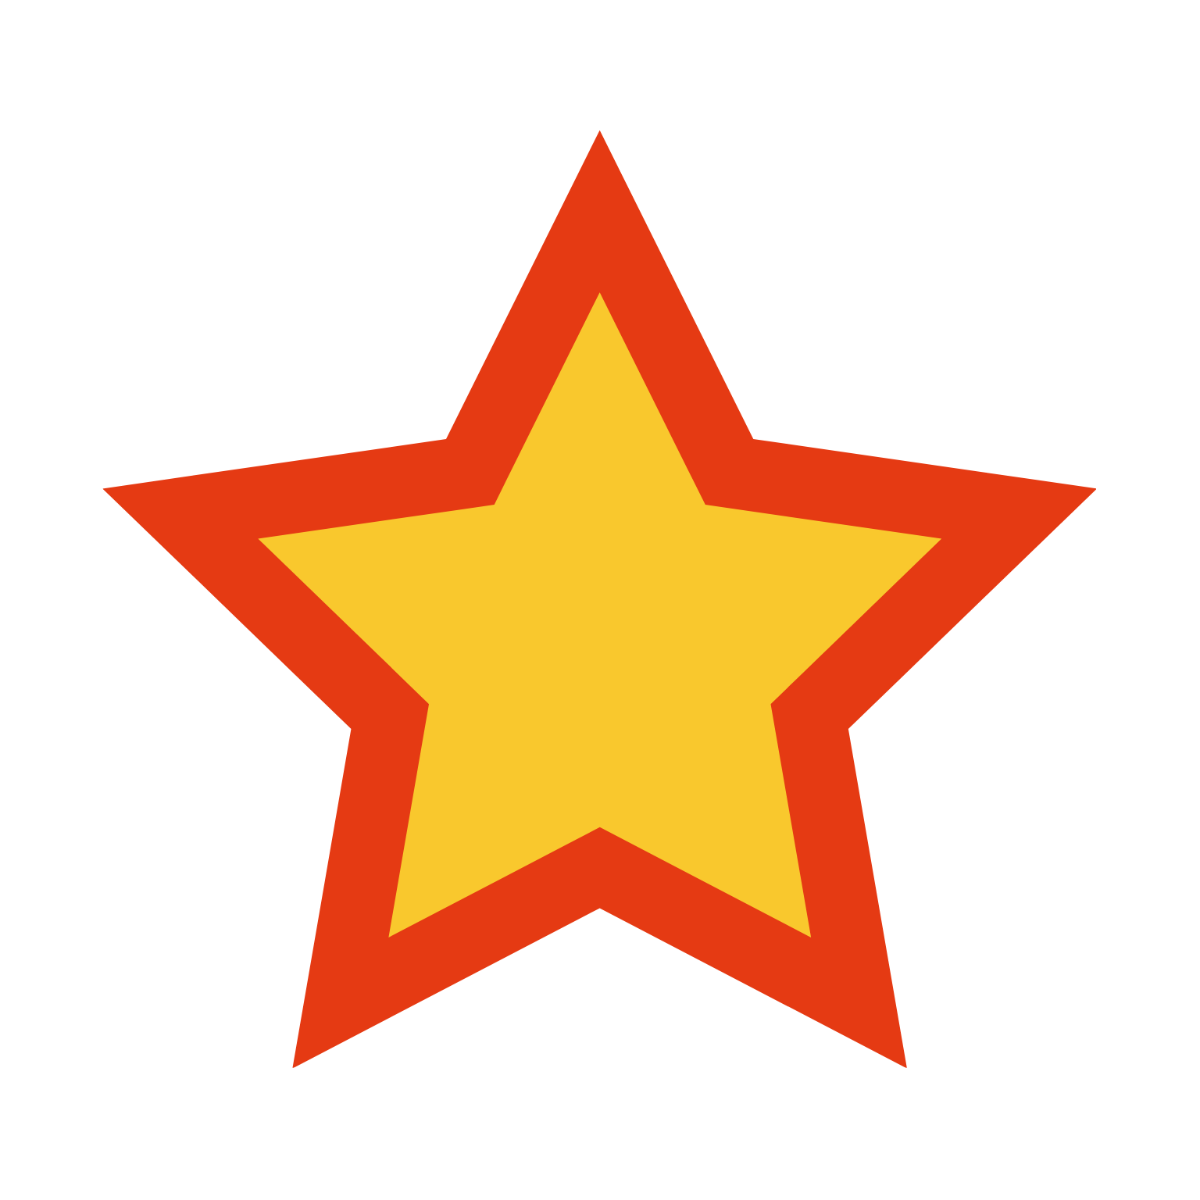 Five Pointed Star Vector